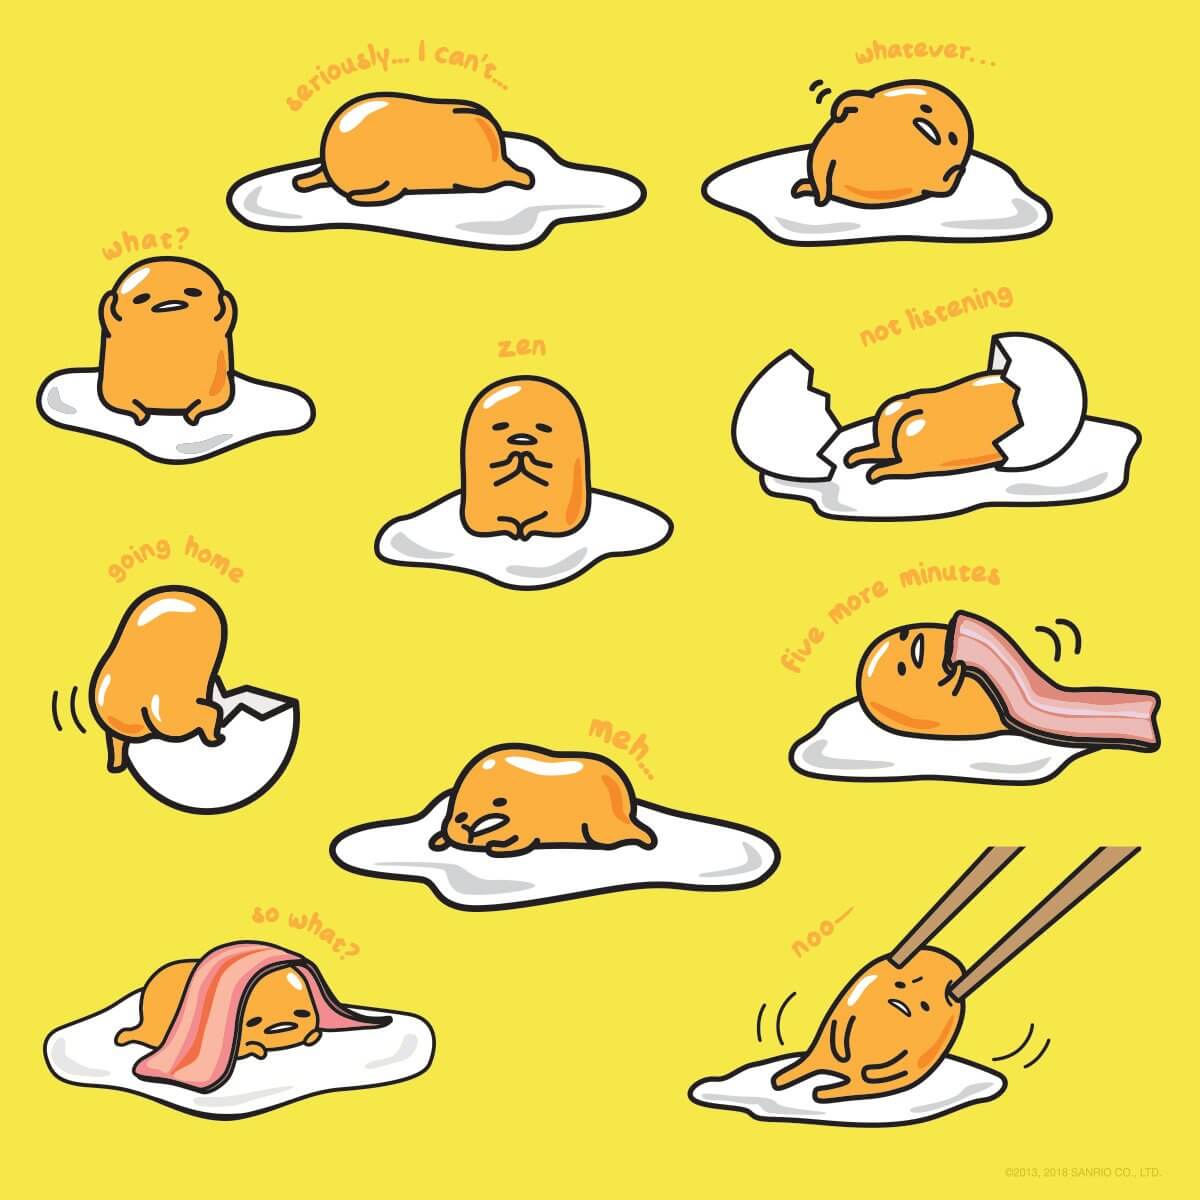 Which Gudetama are you today?